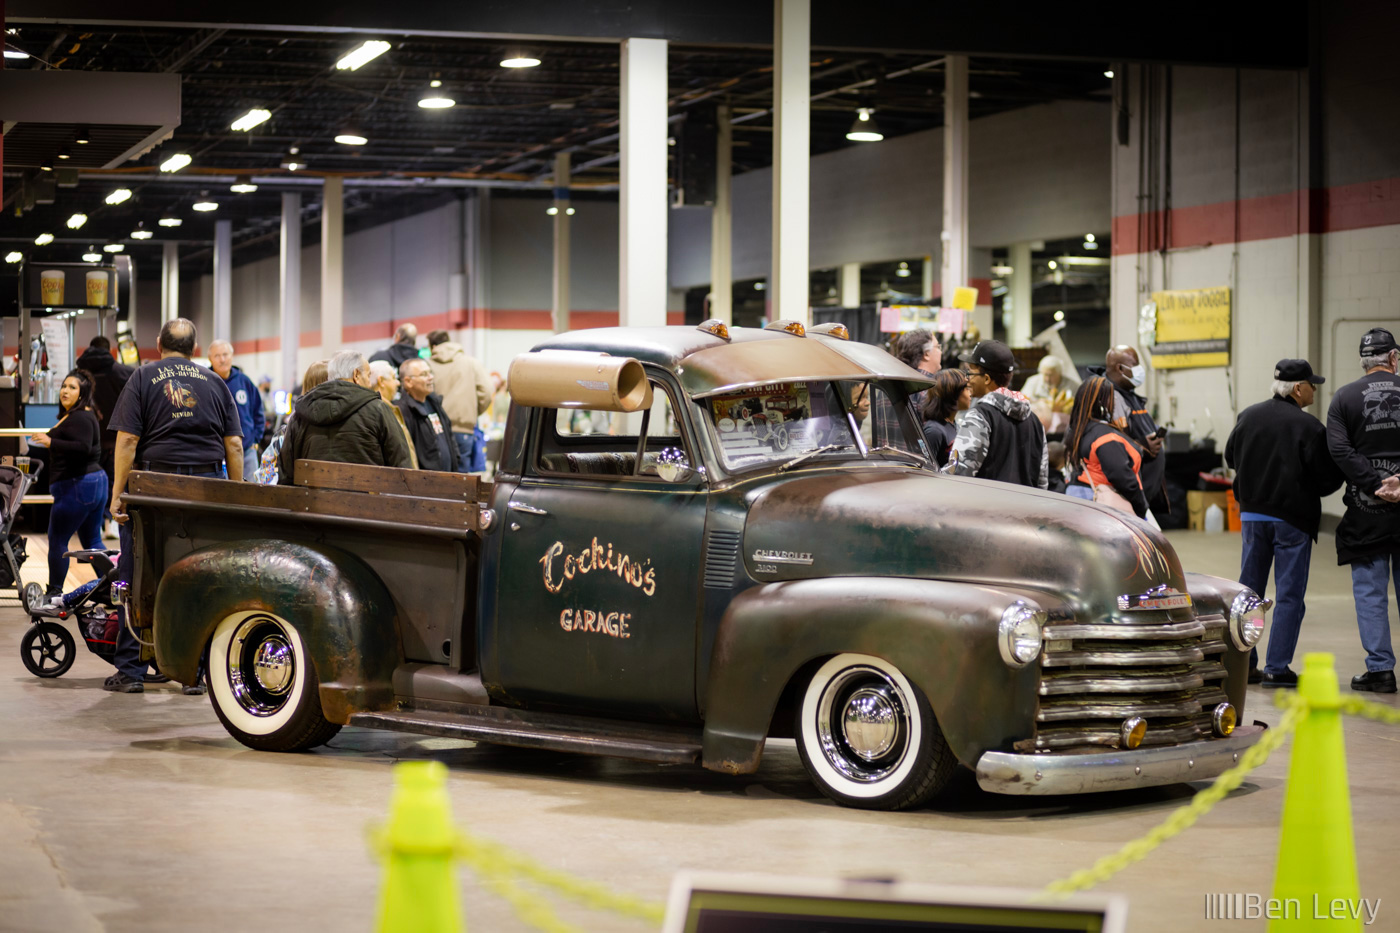 Chevrolet 3100 Pickup with Cochino's Garage on the Side